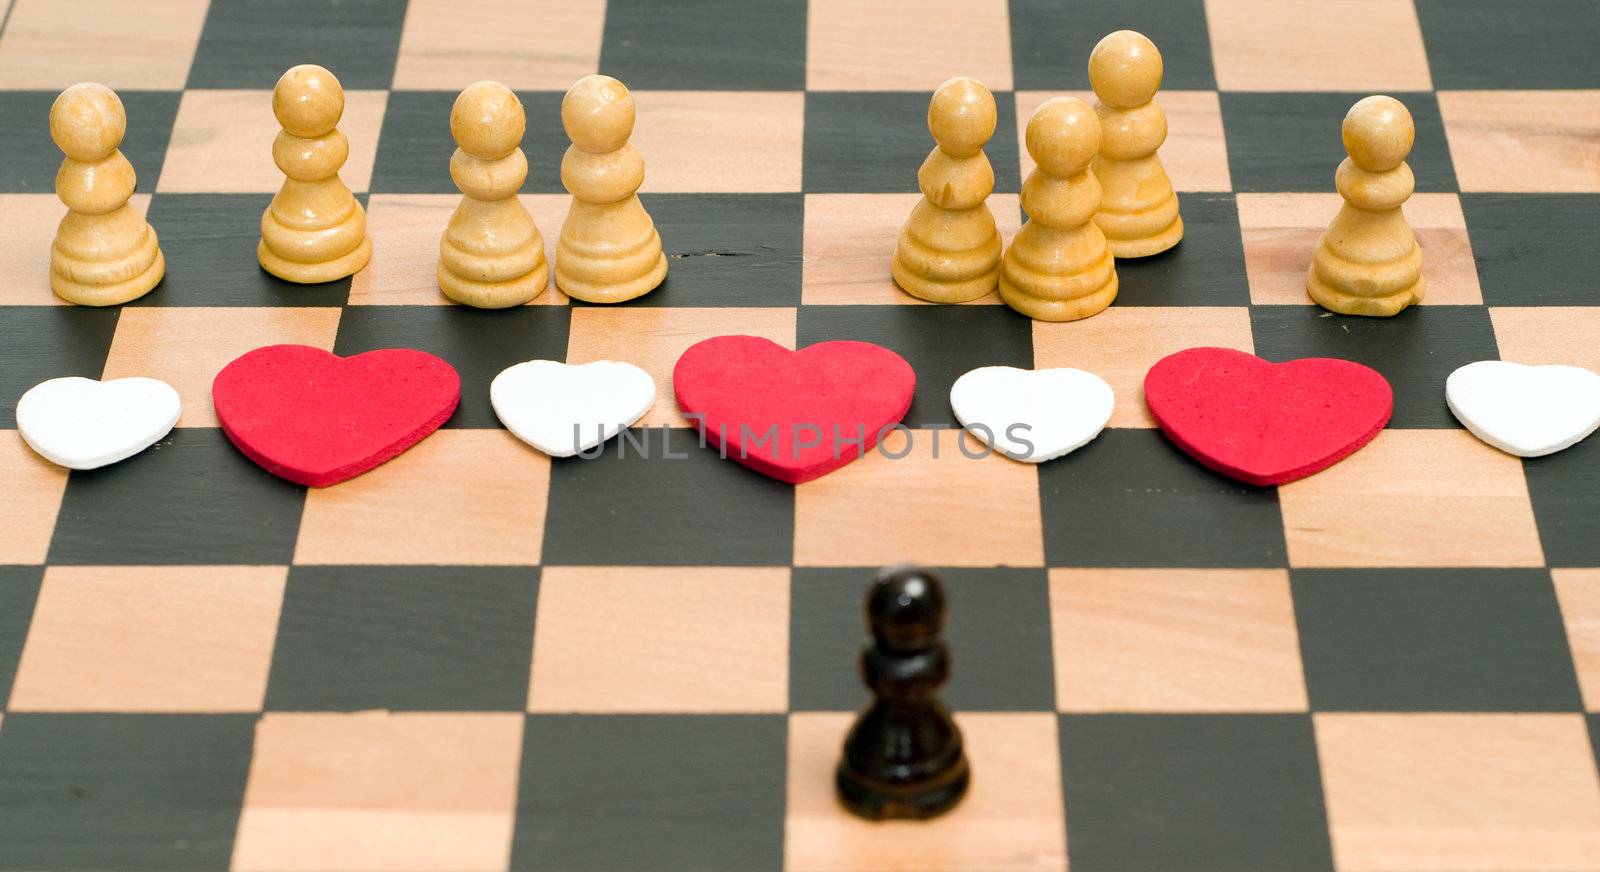 Conceptual image of a man in love with an assortment of women, using chess pieces to convey the concept